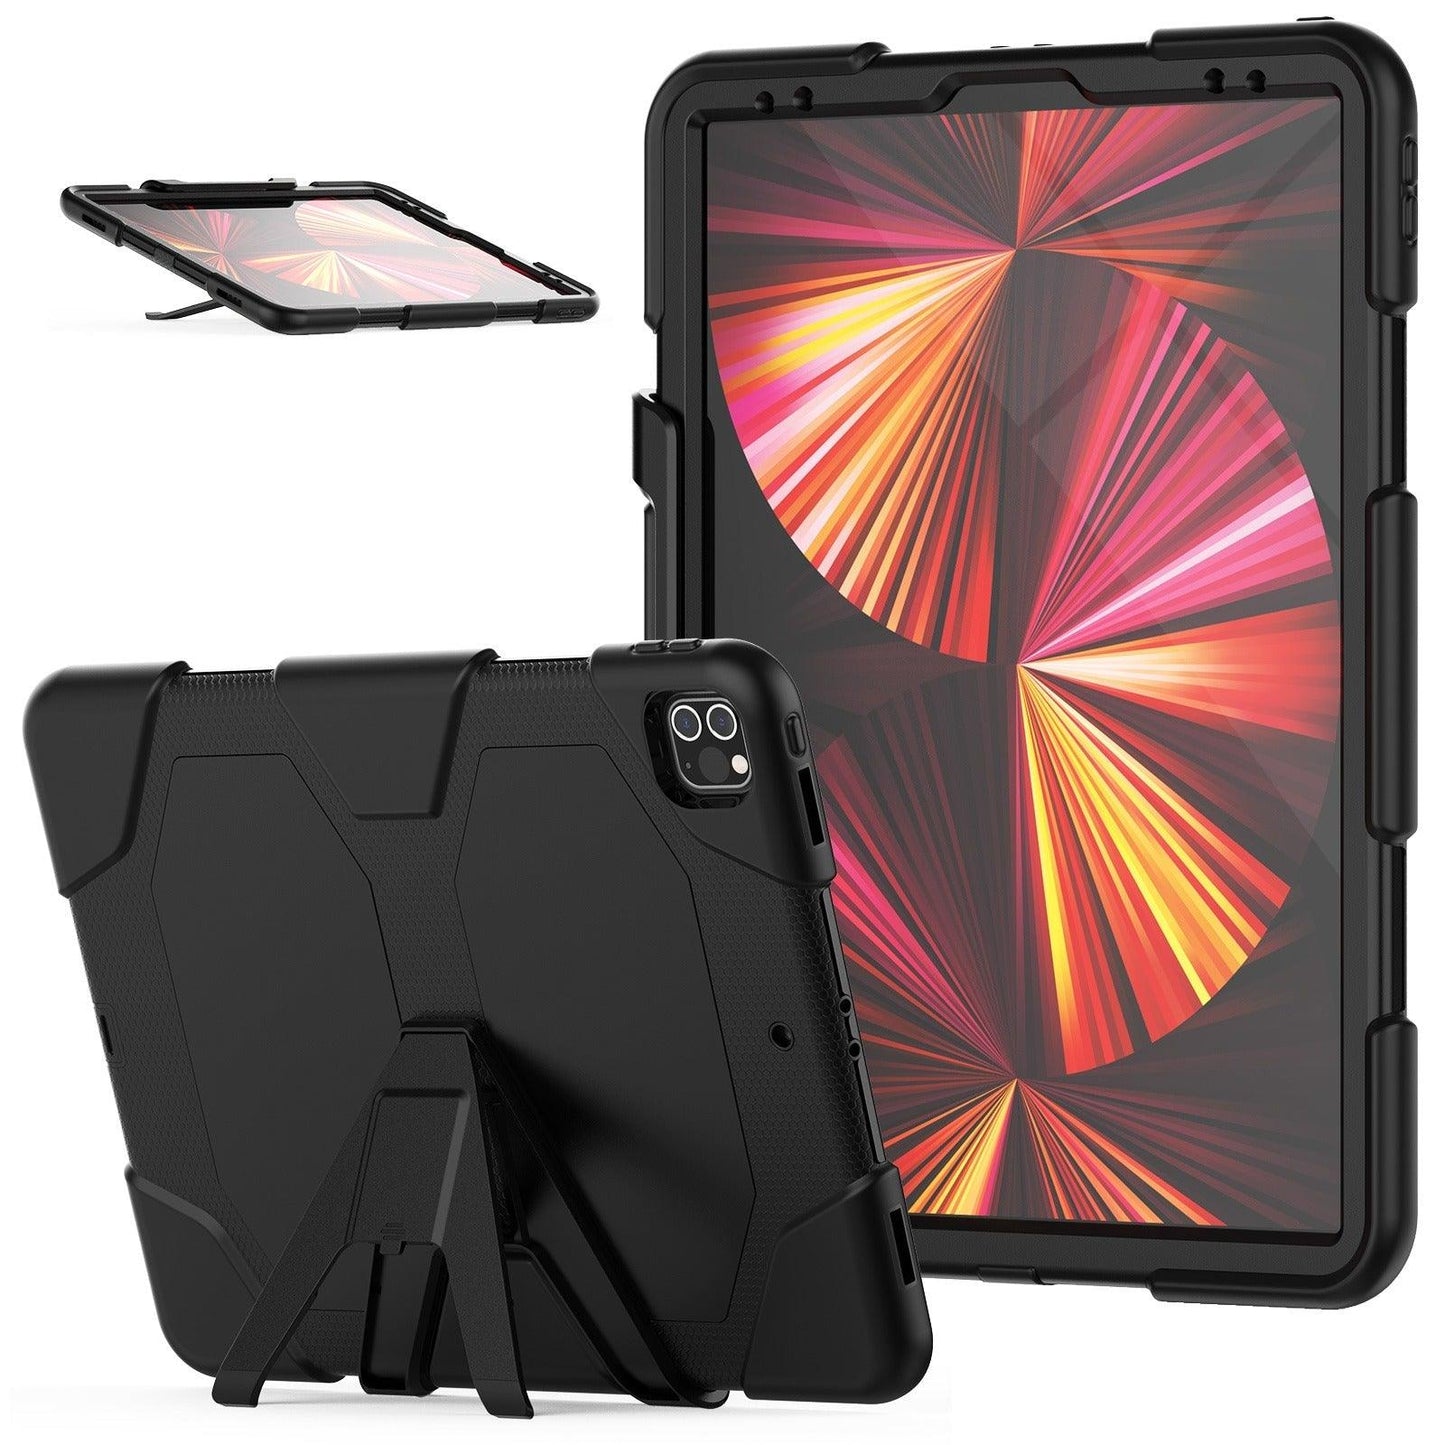 Aetherius Heavy Duty iPad Pro Case with Kickstand and Screen Protector - Astra Cases SG